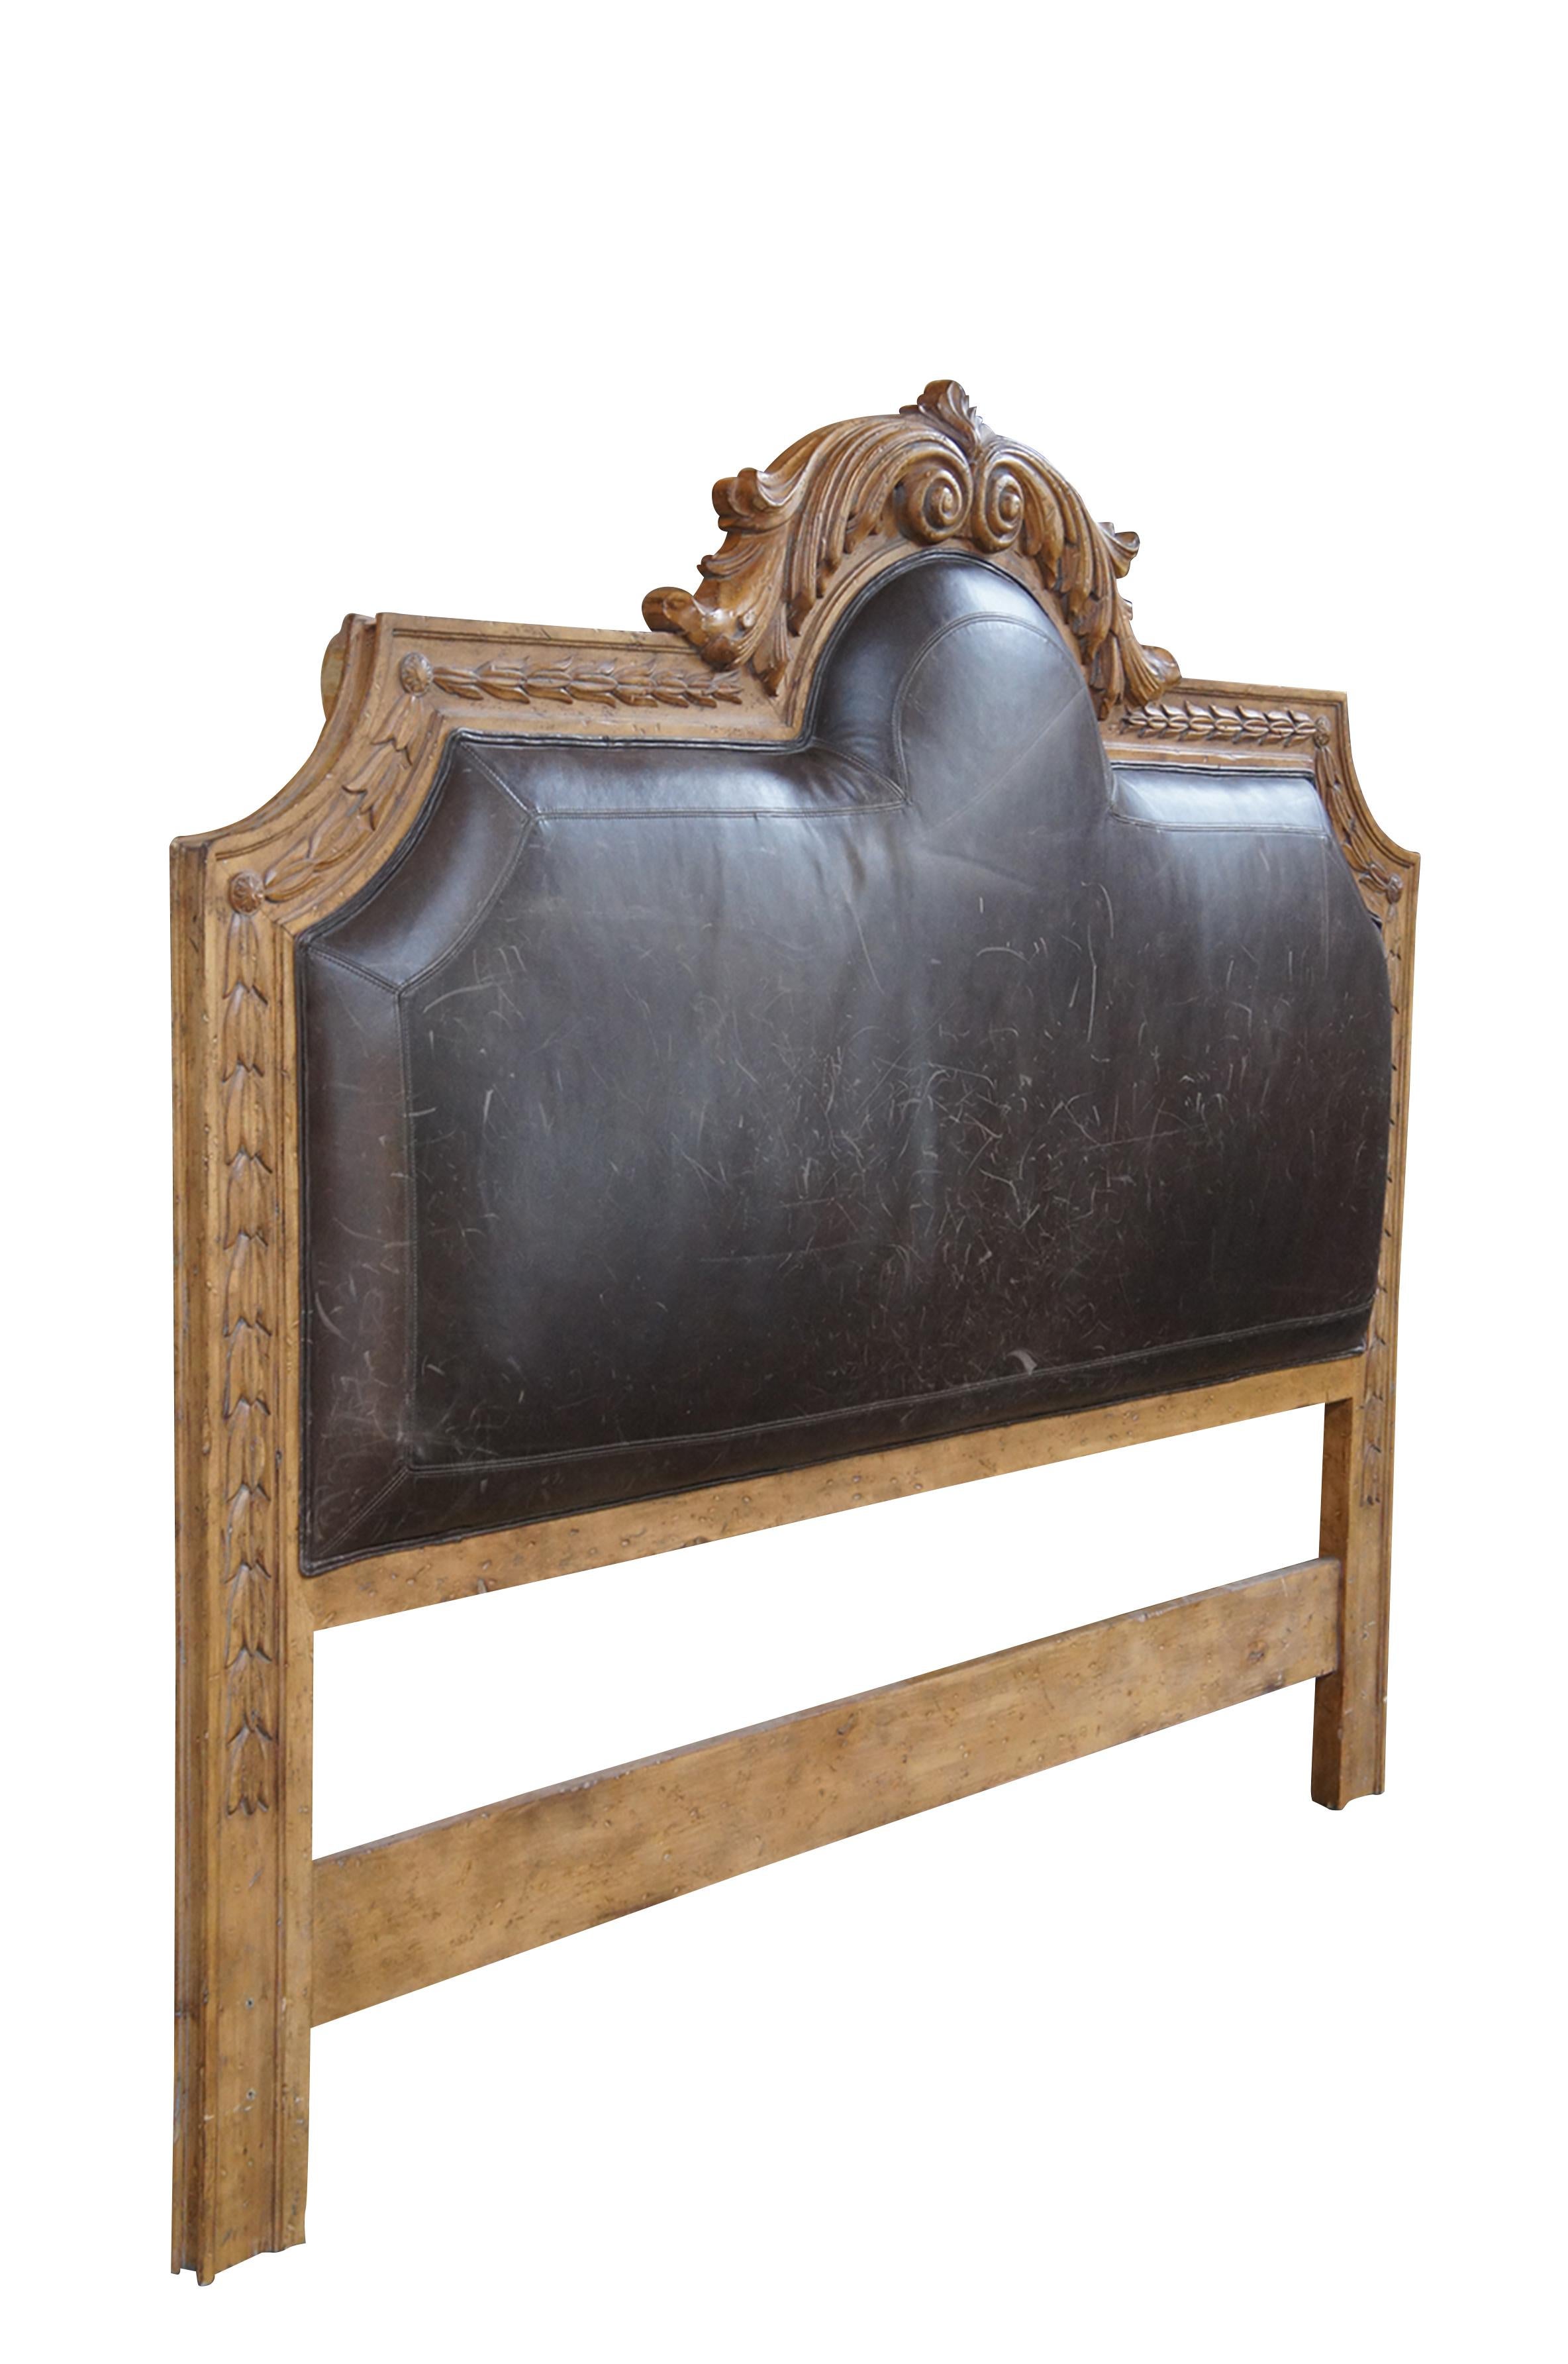 Vintage king size headboard featuring padded leather head rest and domed serpentine frame with French acanthus and tulip design.

Dimensions:
68